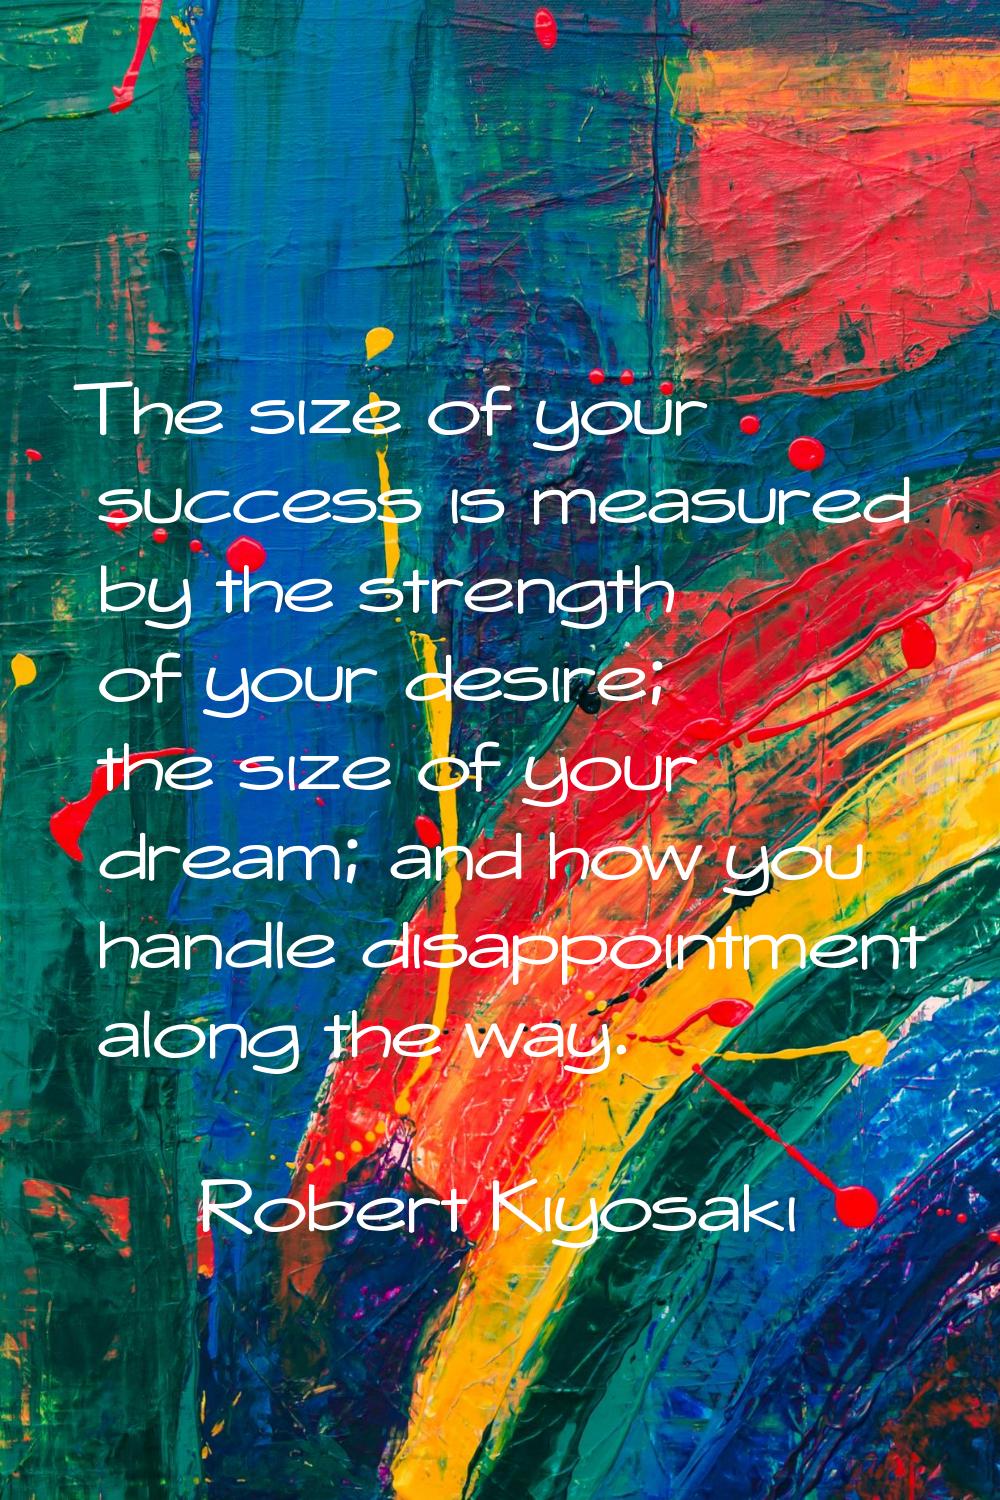 The size of your success is measured by the strength of your desire; the size of your dream; and ho